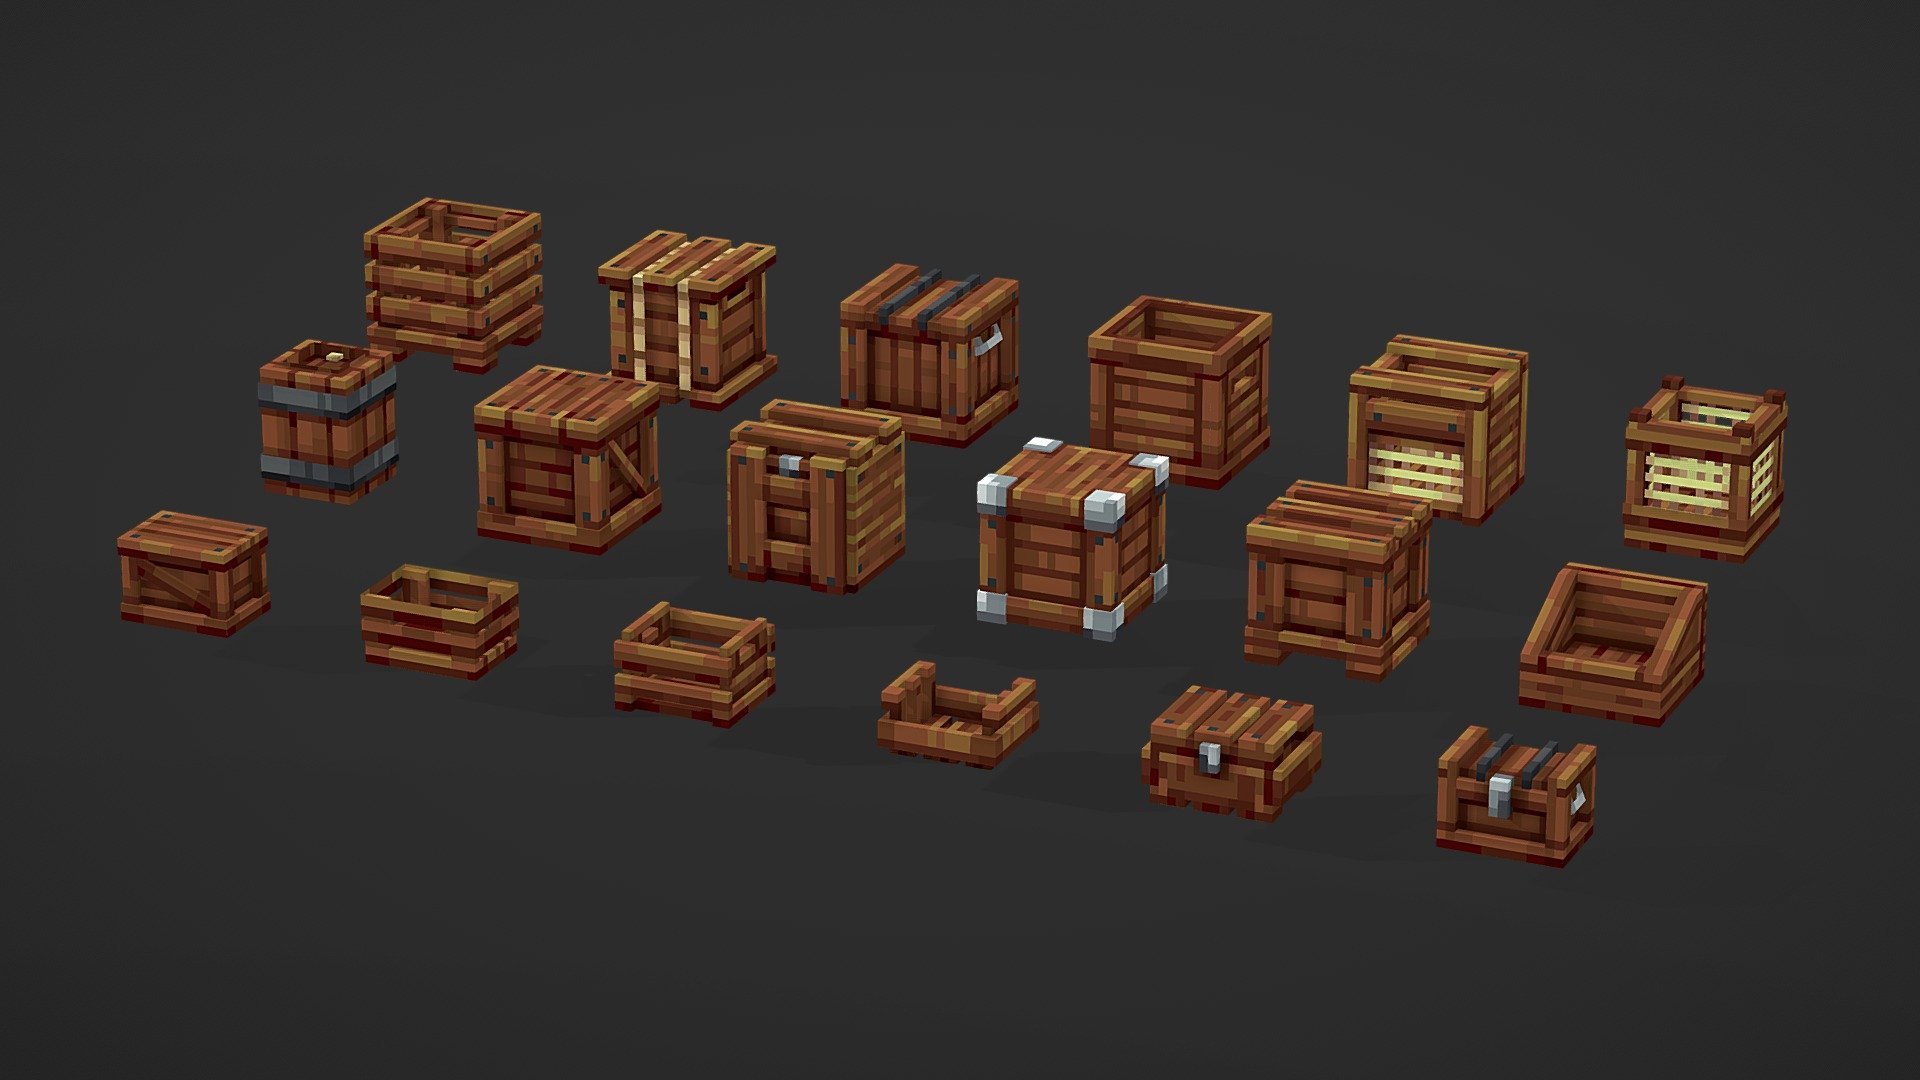 Pack with 18 lowpoly crates &amp; chests. Suitable for Minecraft or any other lowpoly pixel-style project! Easy to add in game using block wizard plugin from Blockbench!

Works with Minecraft Bedrock &amp; Java edition.

.bbmodel source project files also included!

Textures for each model is 64x64 pixels

Press 2 in 3D viewer to view base colors (1 to go back to rendered view) - Chests & Crates - Buy Royalty Free 3D model by Wacky (@wackyblocks) 3d model